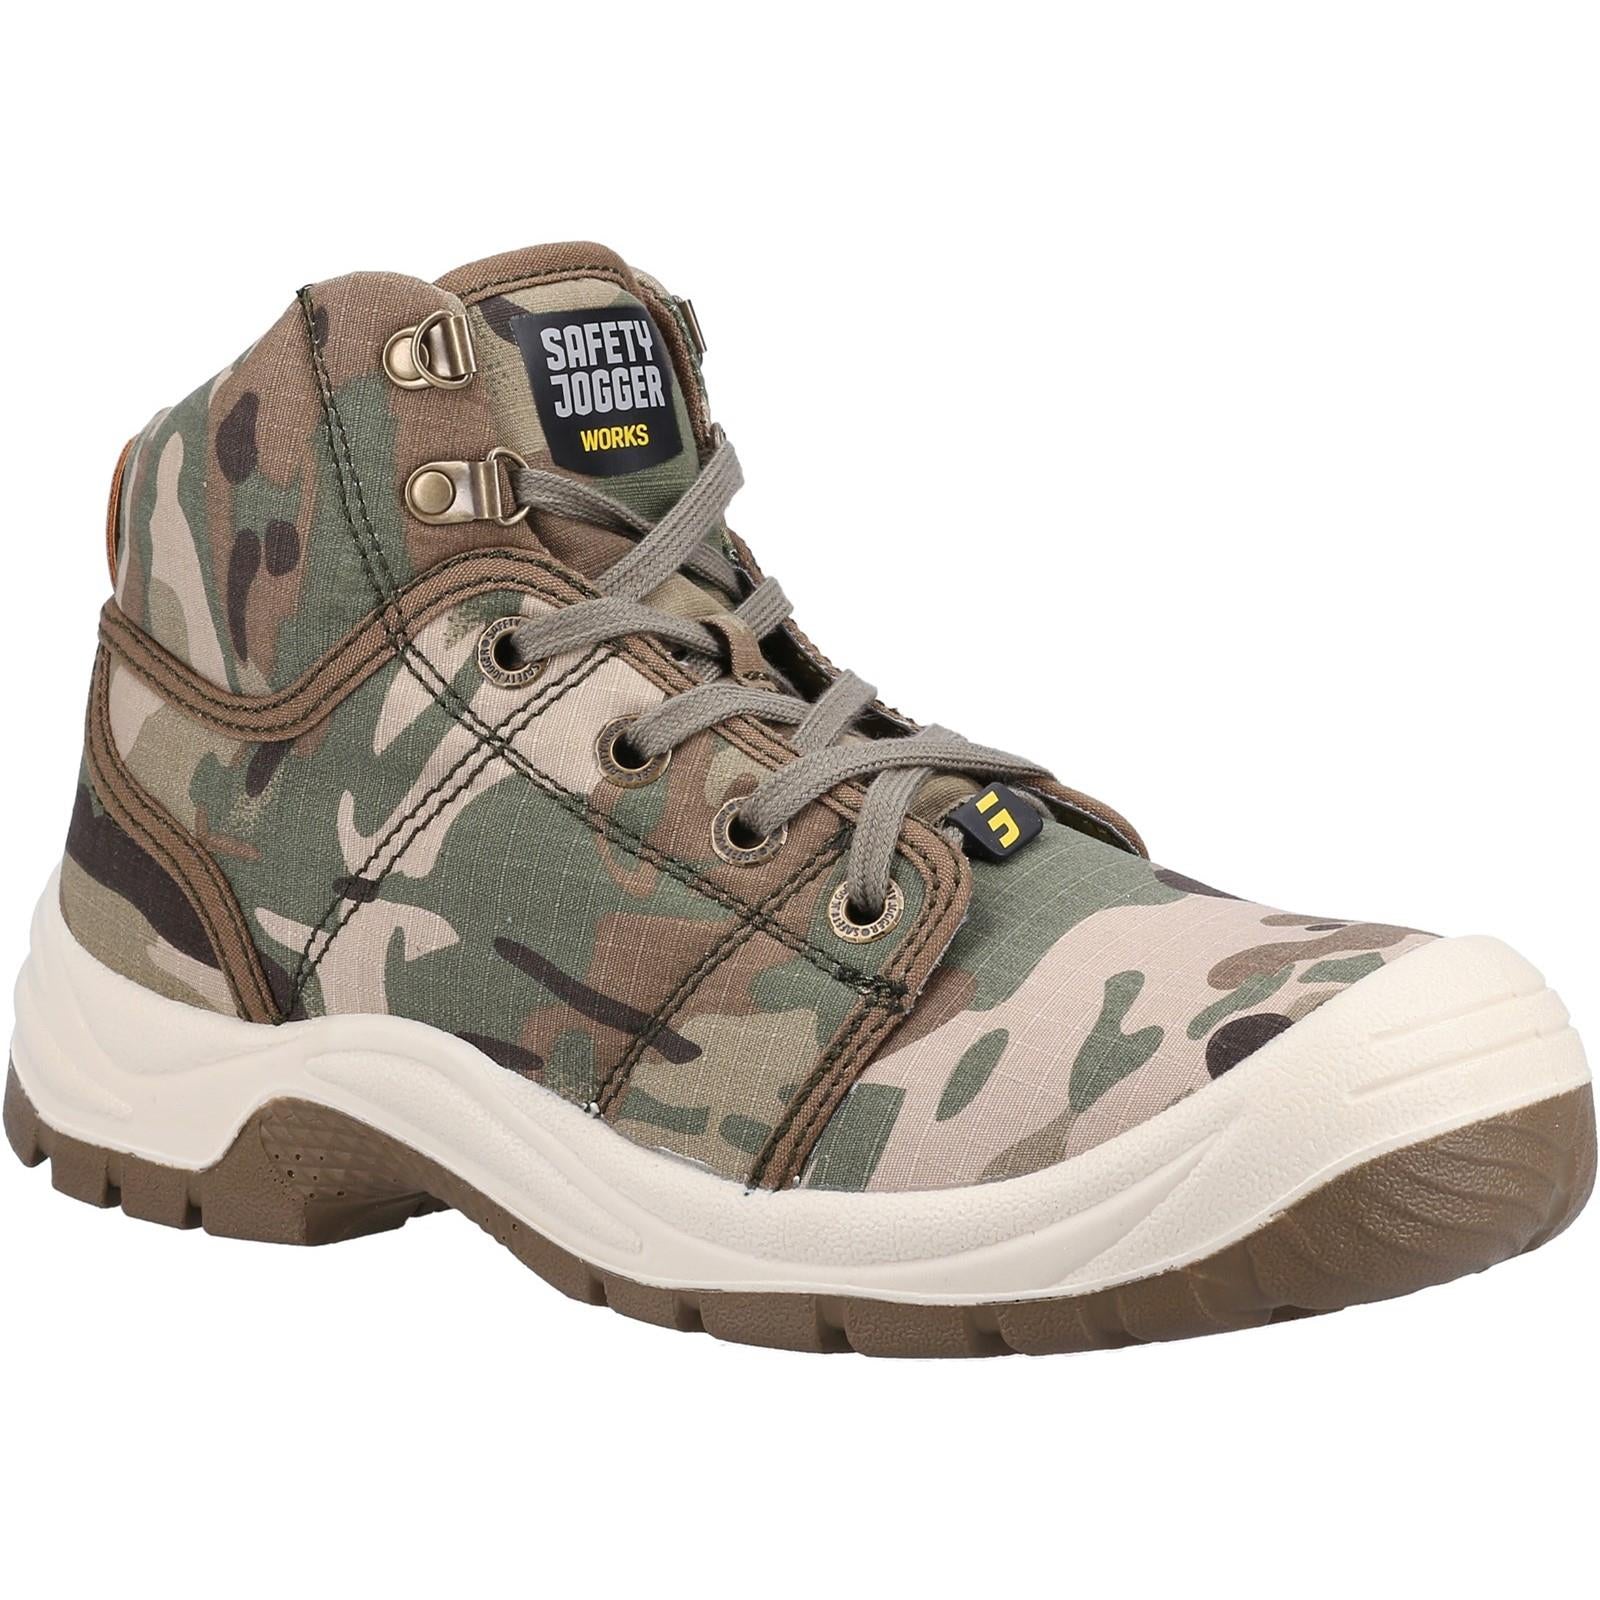 Safety Jogger Desert S1P camo camouflage steel toe/midsole work safety boots